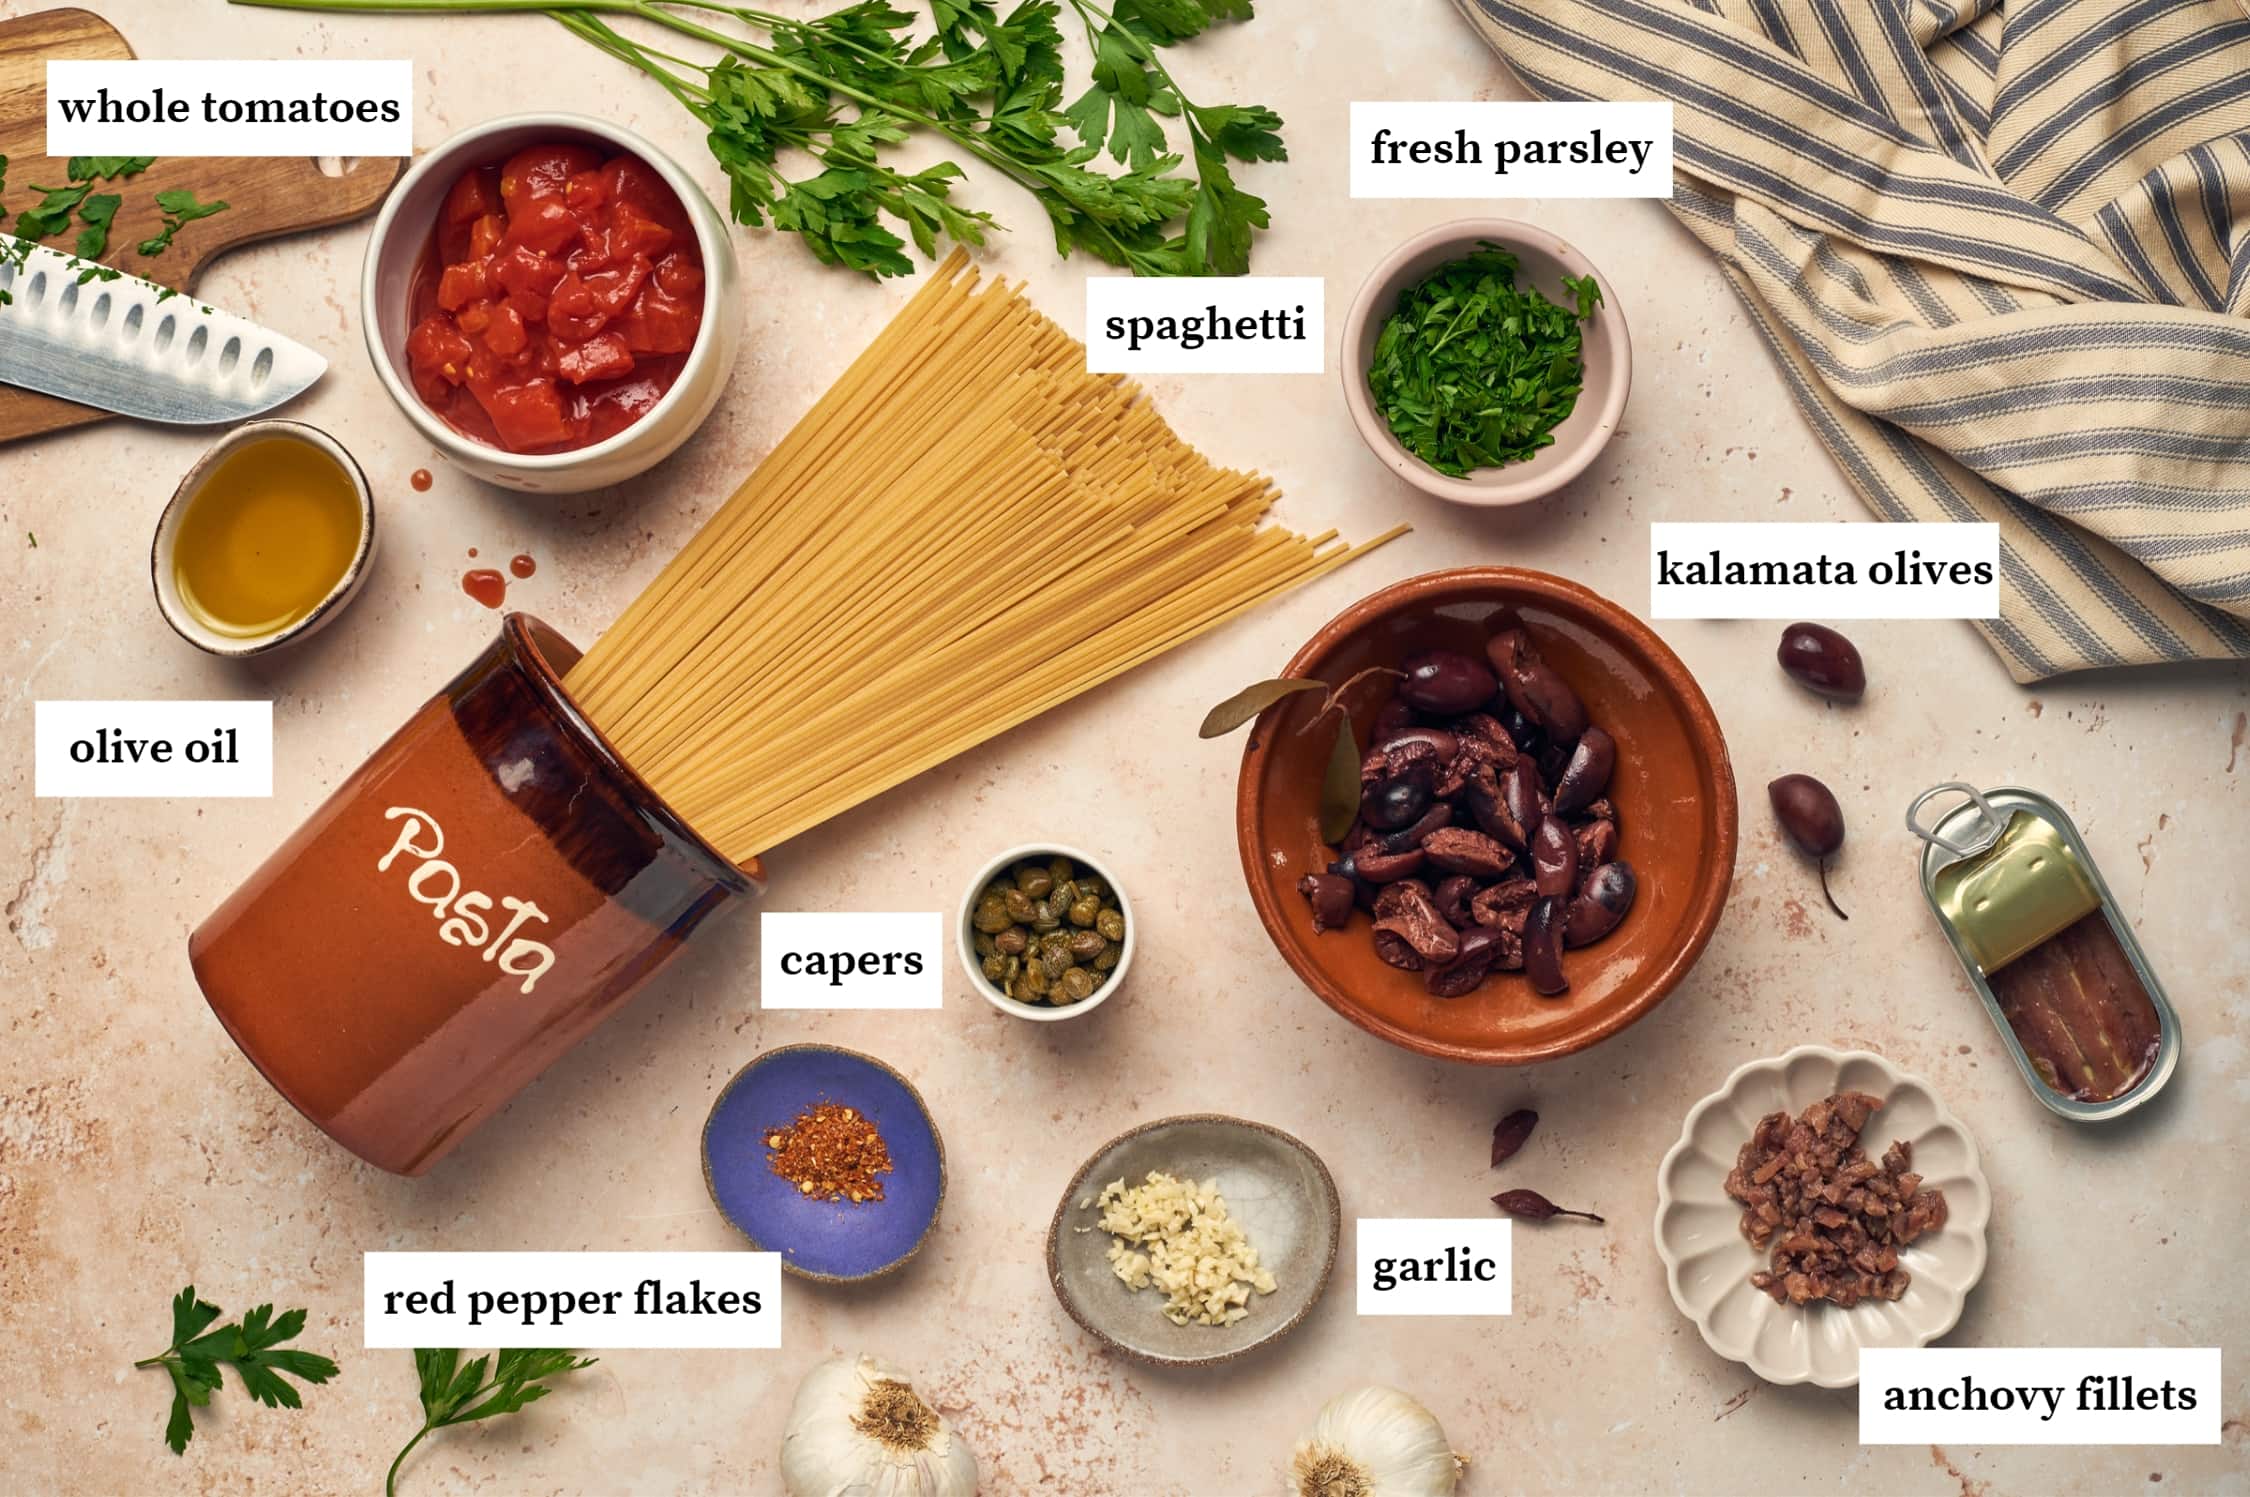 Ingredients for pasta puttanesca on a table: spaghetti pasta, tomatoes, fresh parsley, kalamata olives, garlic, anchovy fillets, garlic, red pepper flakes, olive oil.